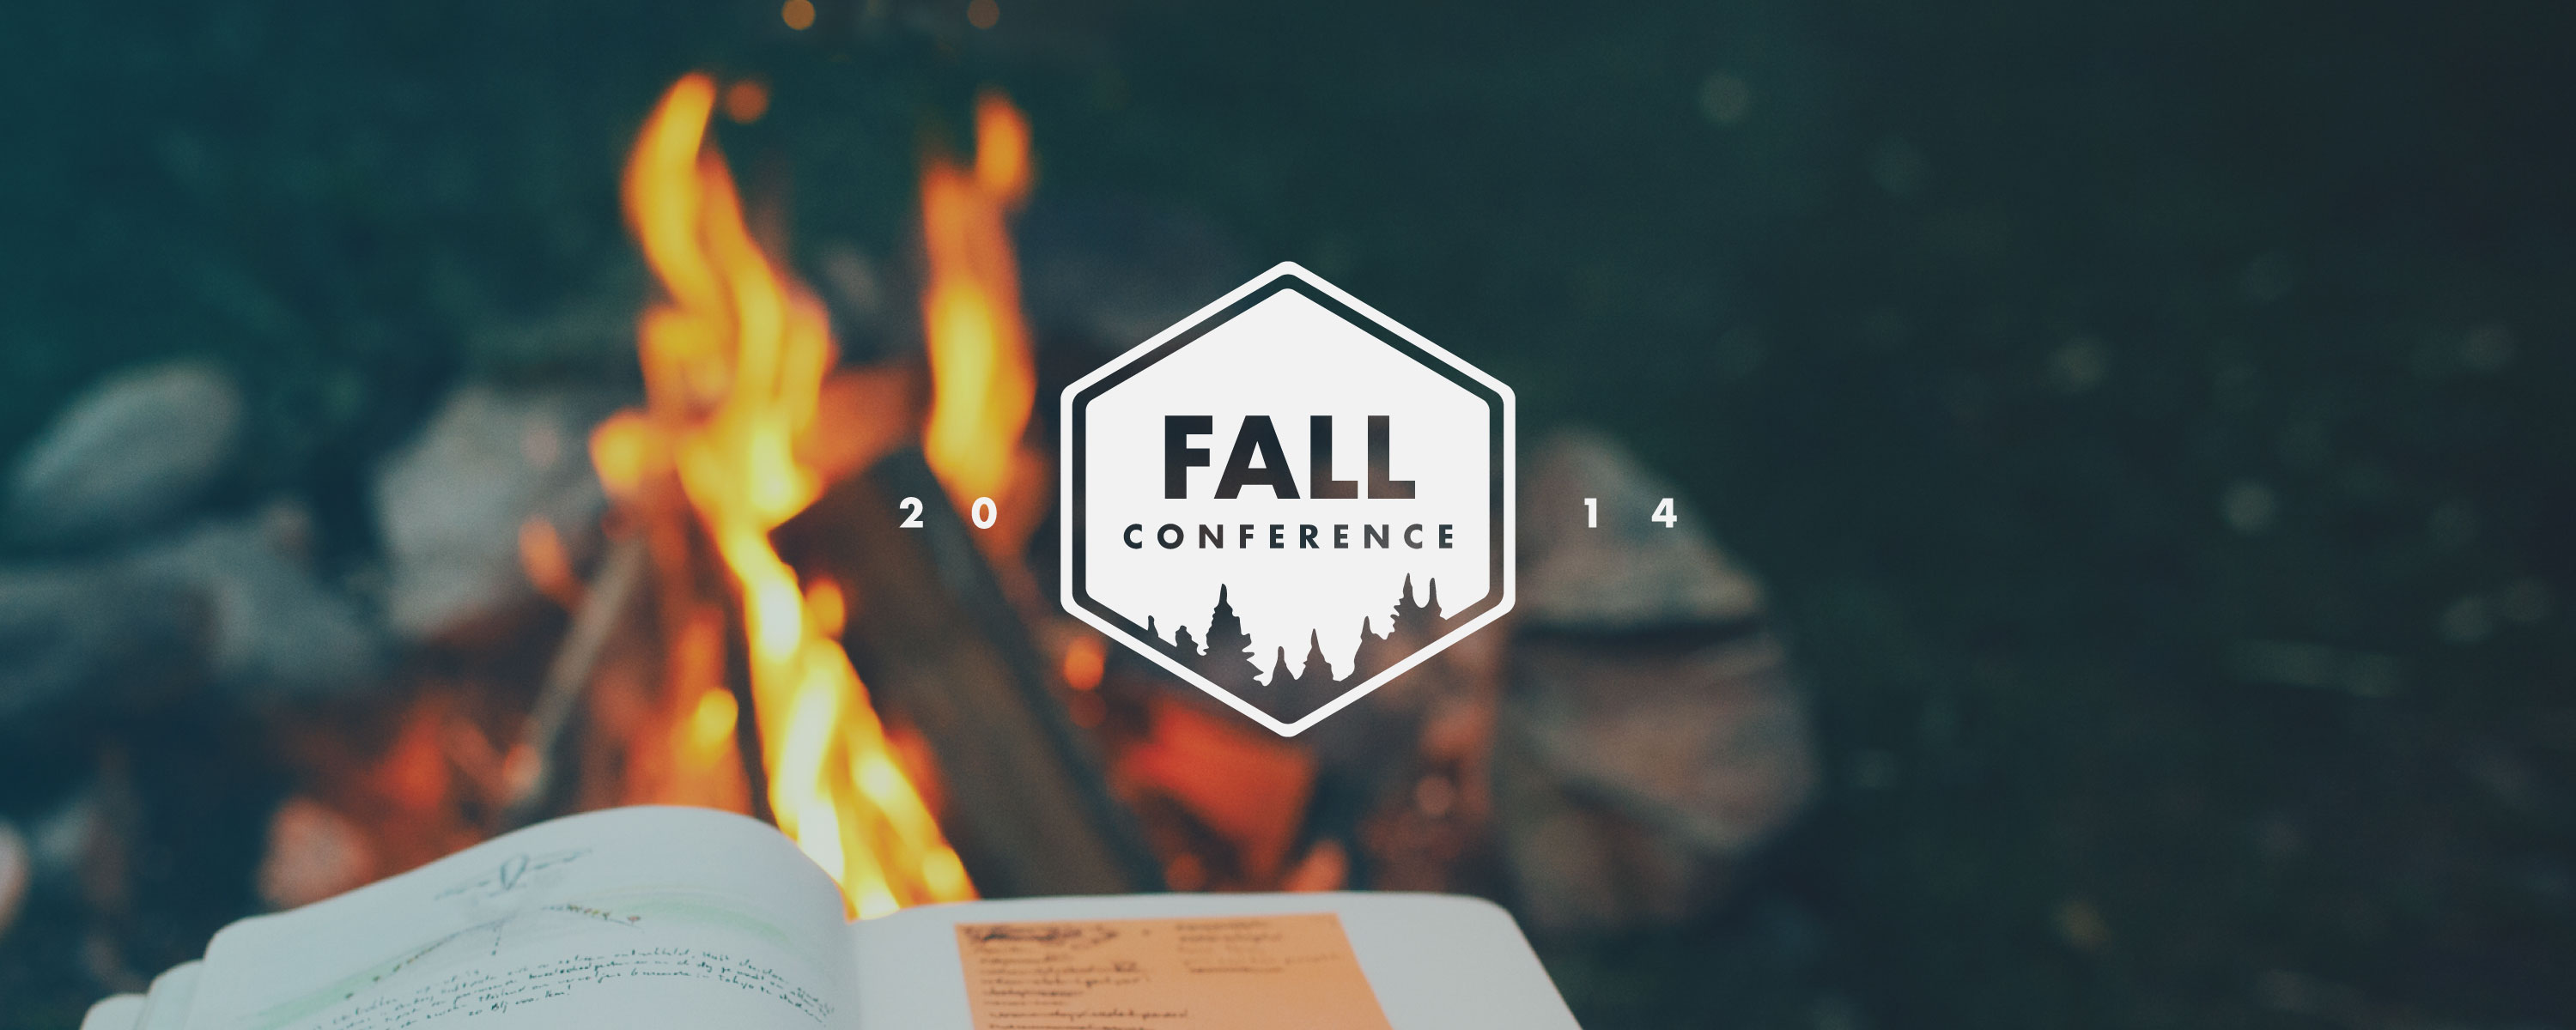 Collegiate Fall Conference by Matt Crummy on Dribbble